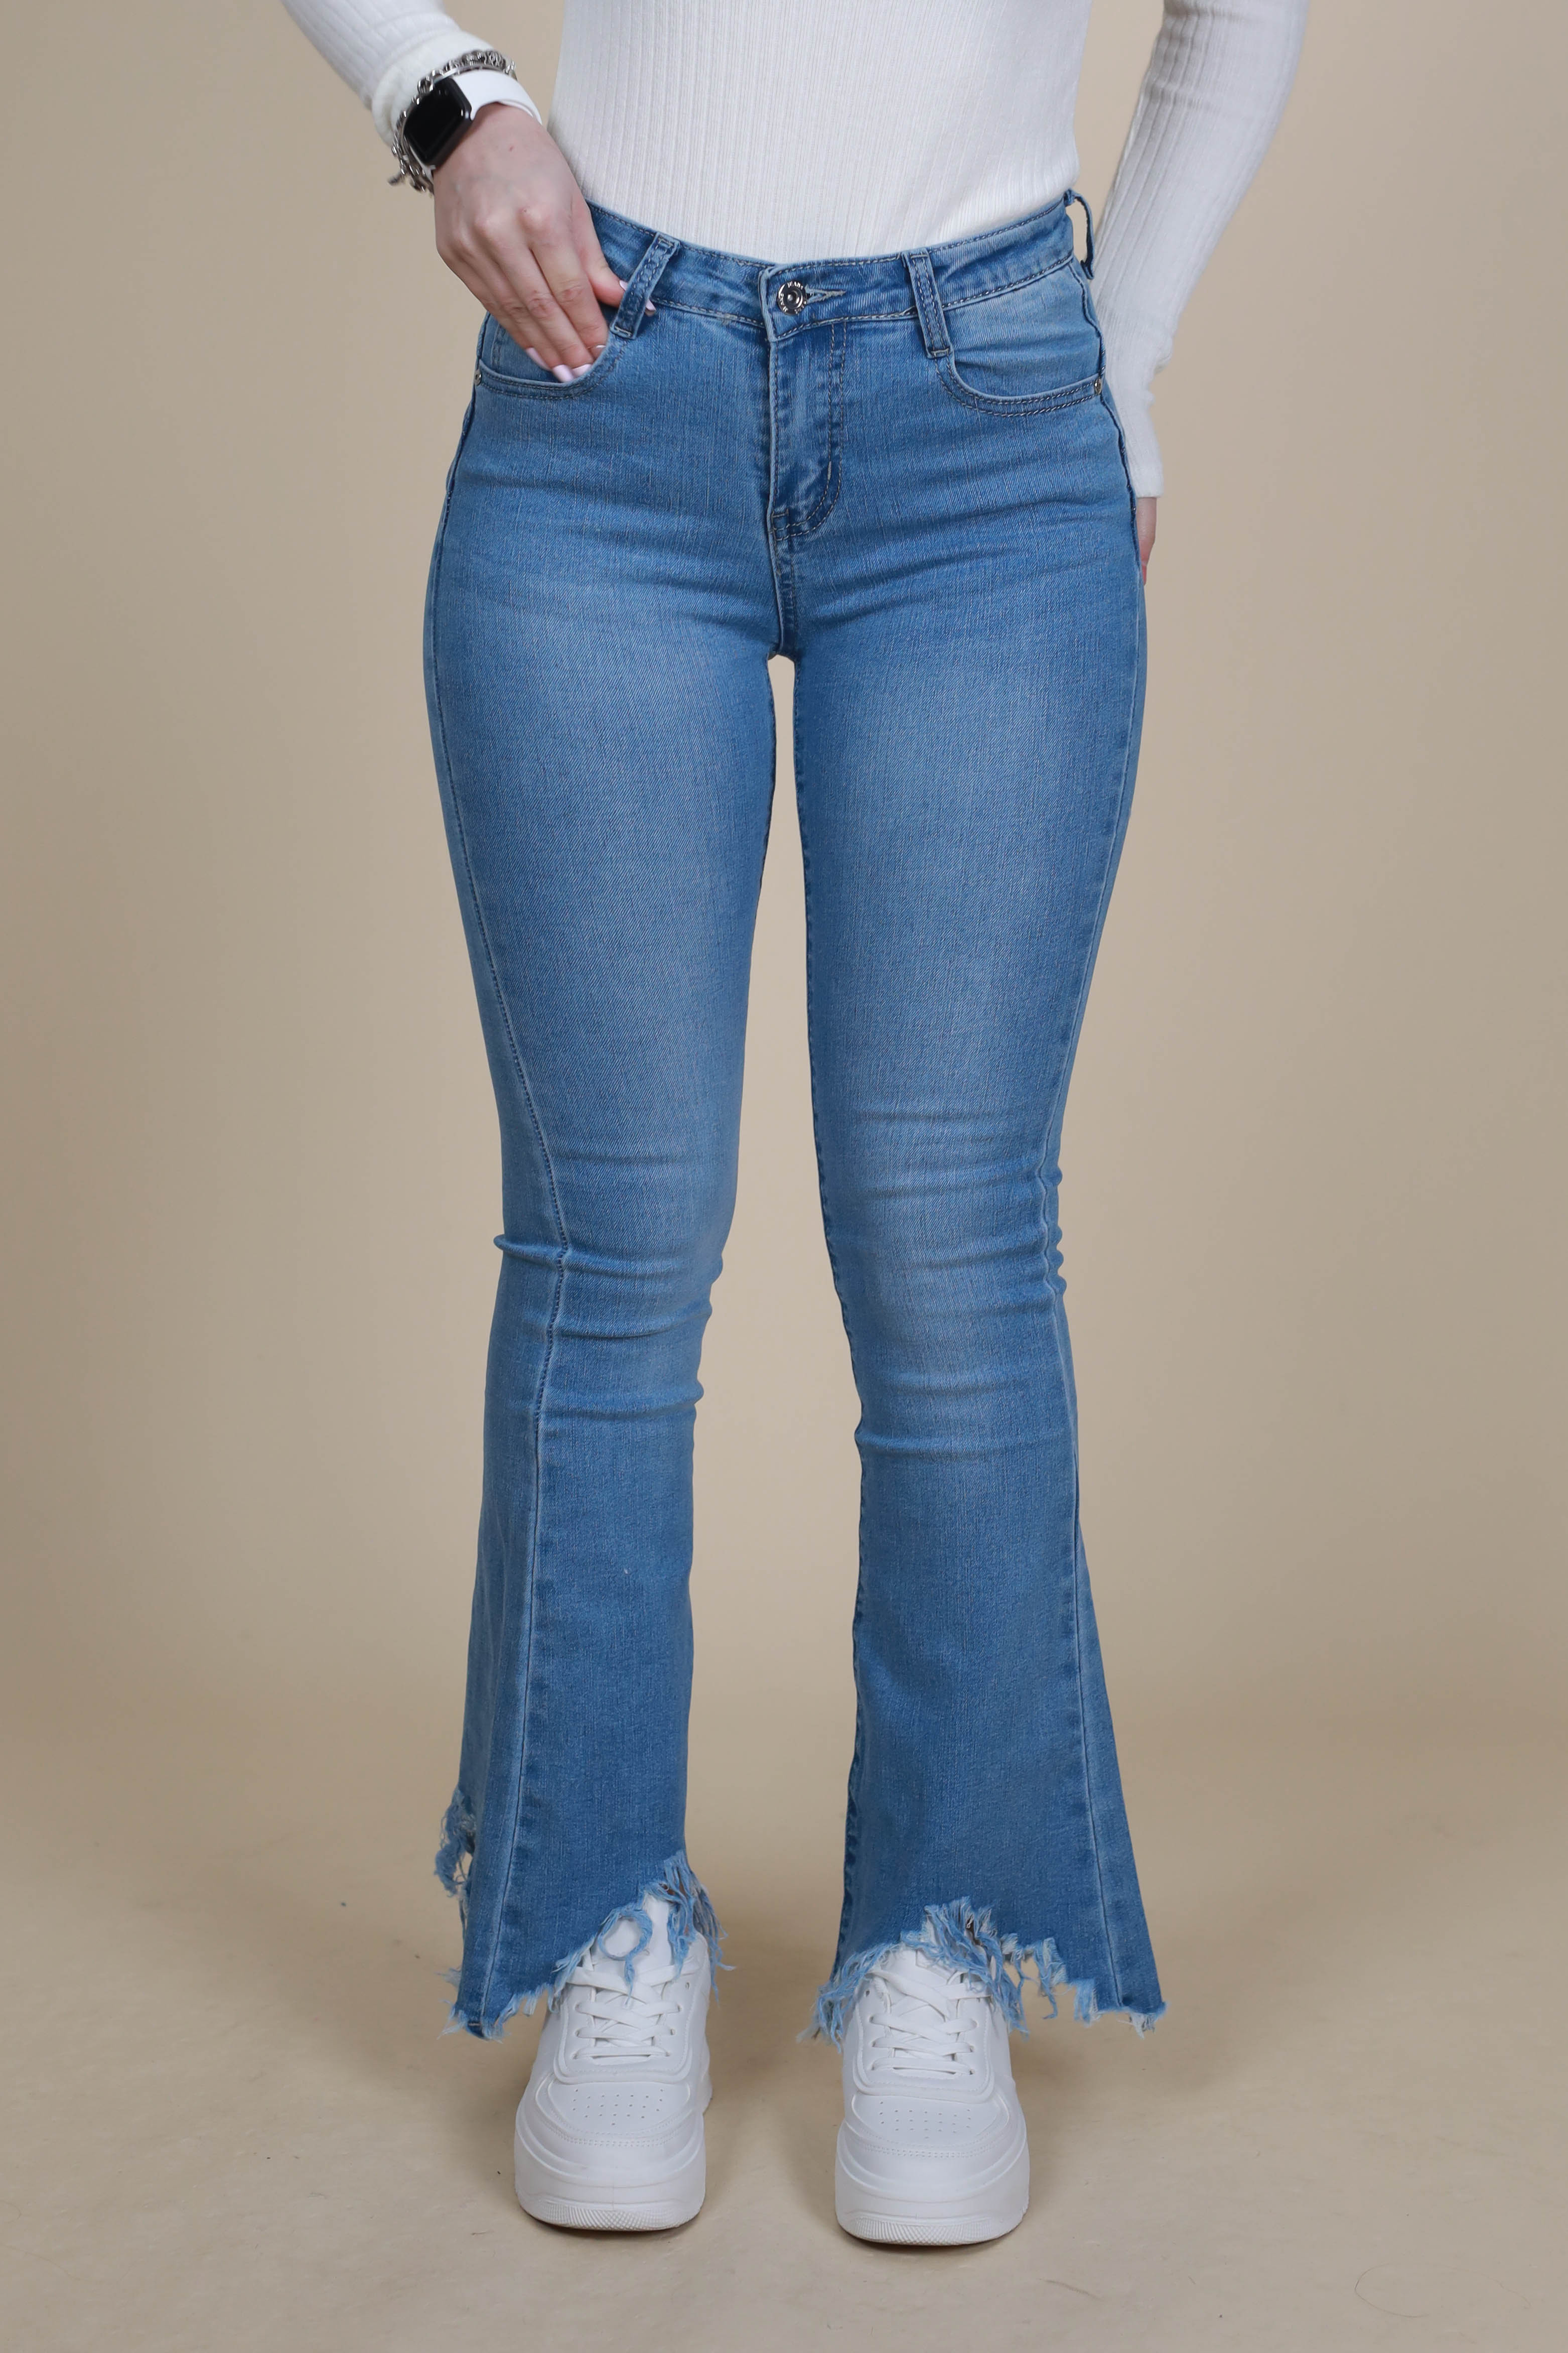 Jeans Hindo S.